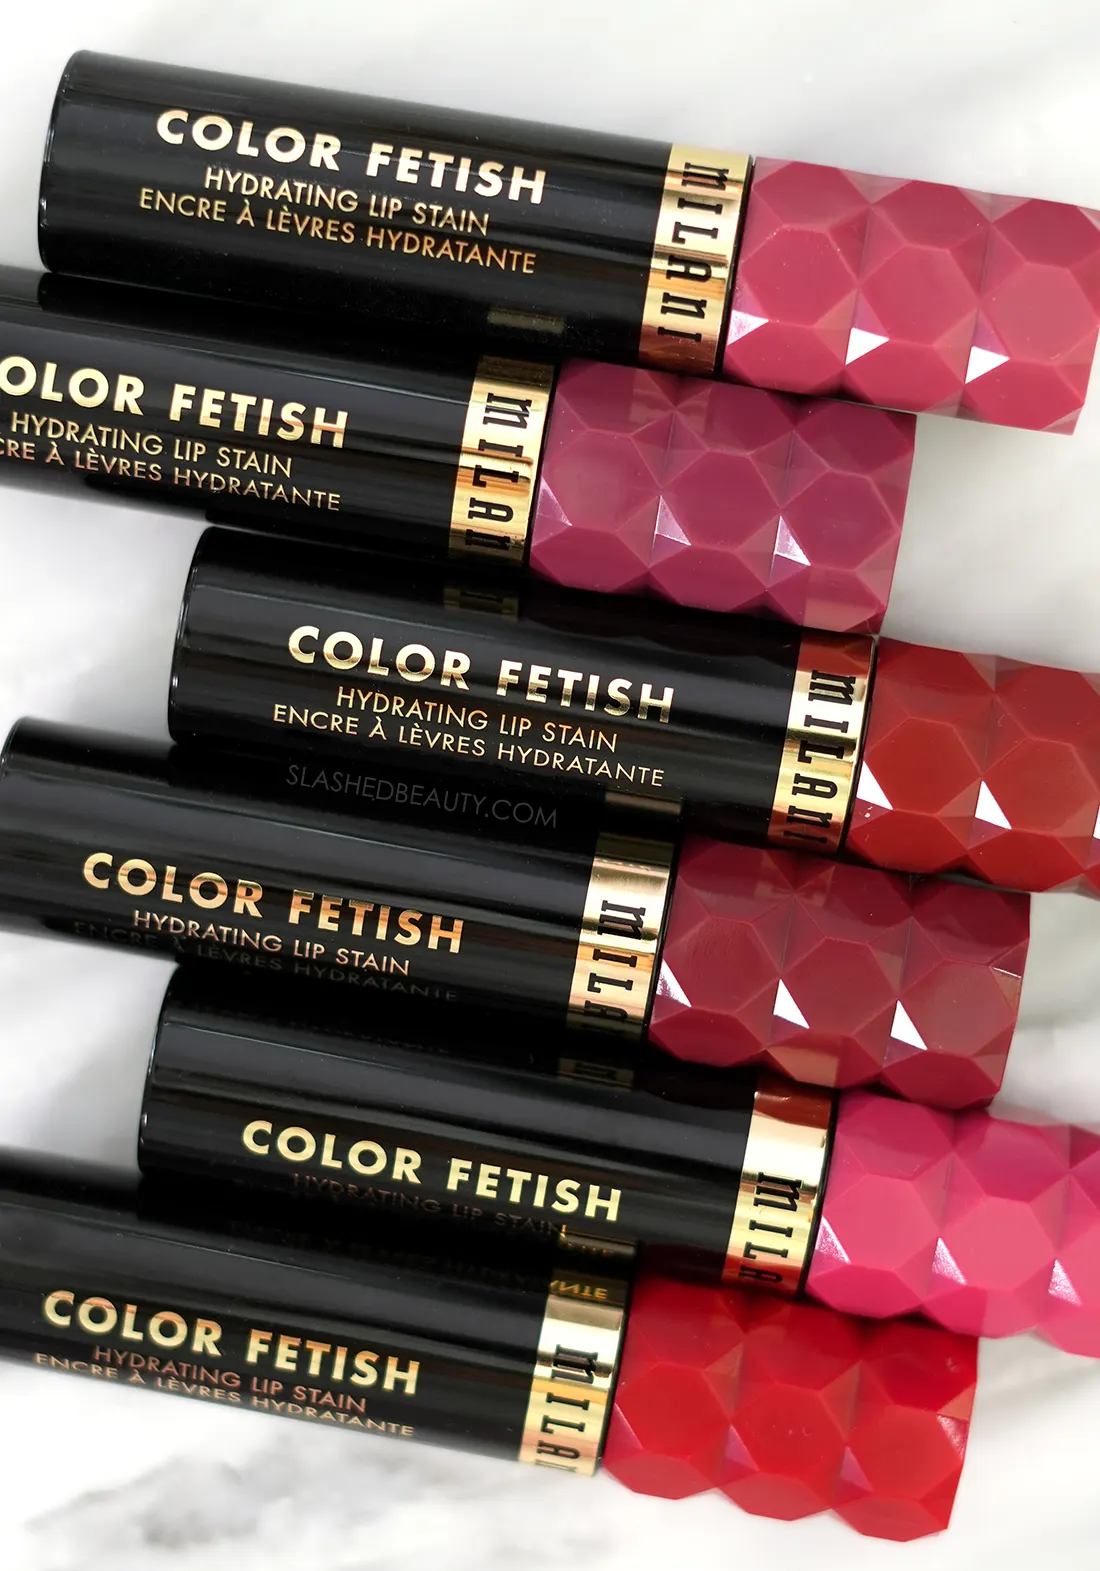 Milani Color Fetish Hydrating Lip Stains lying side by side on marble | Slashed Beauty